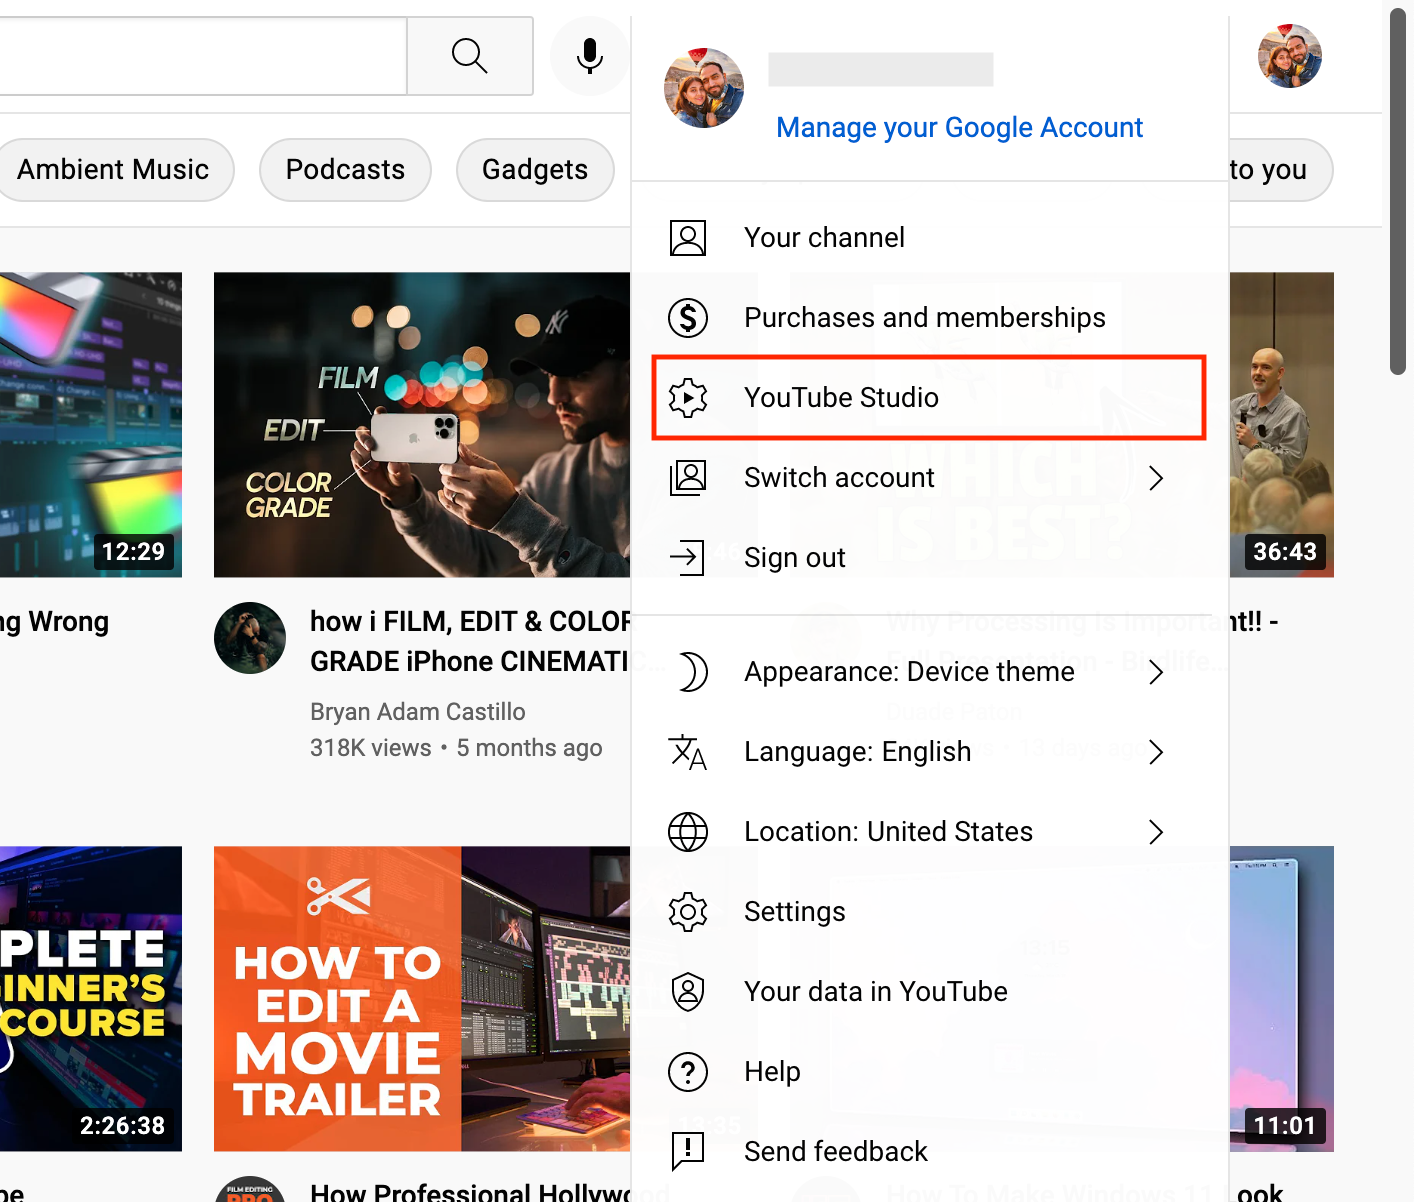 Click on your profile picture in the top right corner
Select "YouTube Studio"